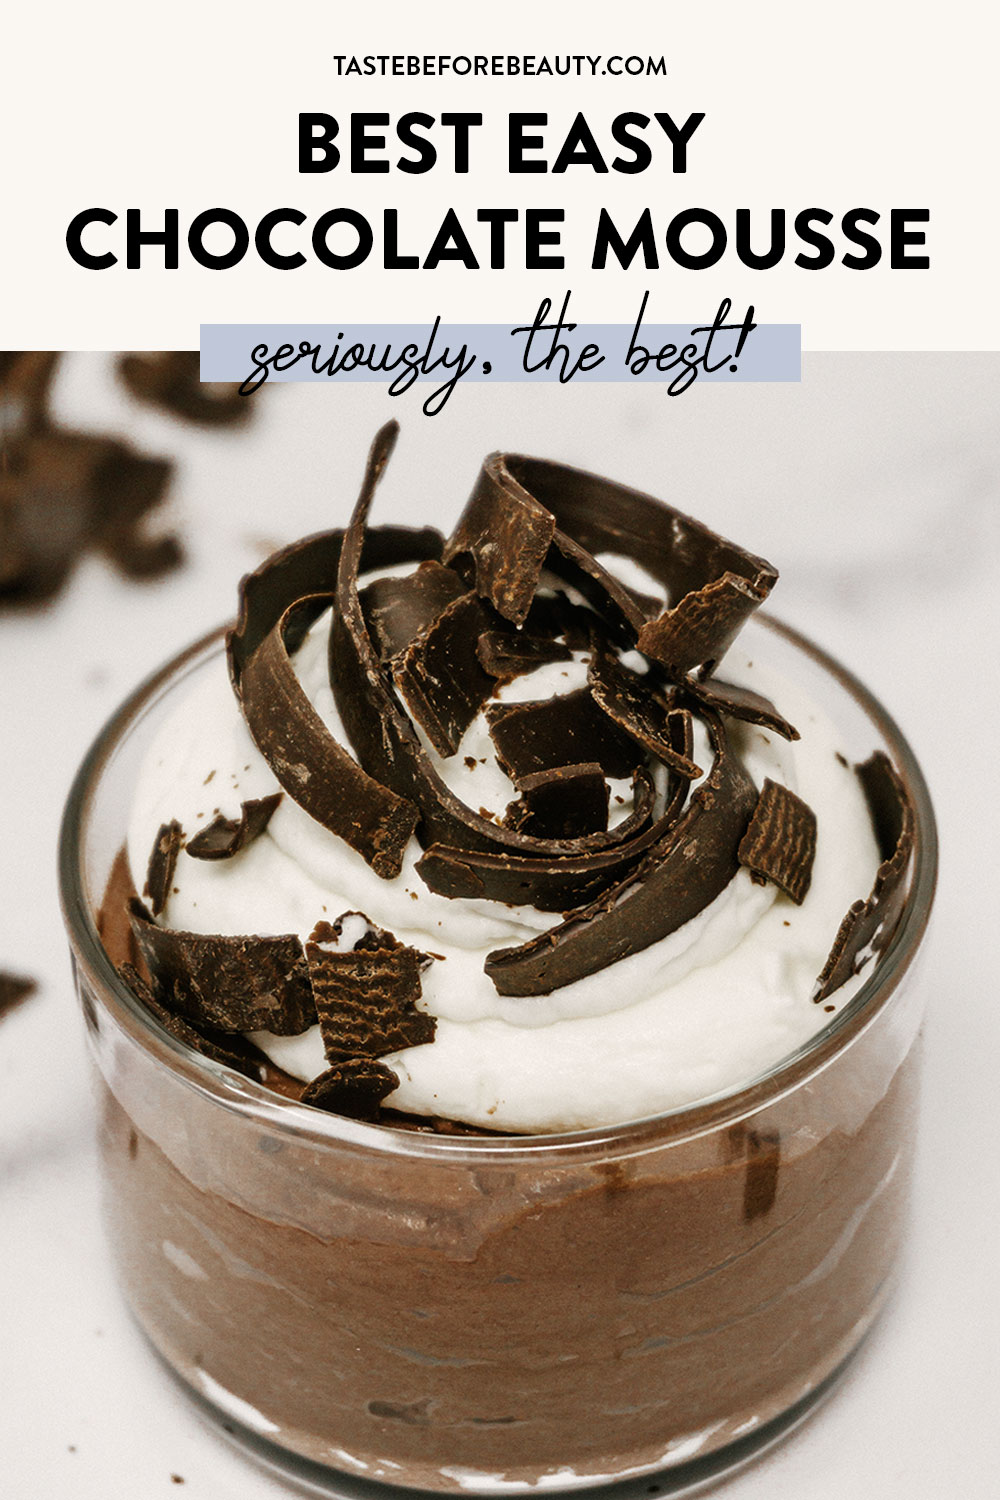 taste before beauty best easy chocolate mousse ini a cup with cream and chocolate shavings pinterest pin